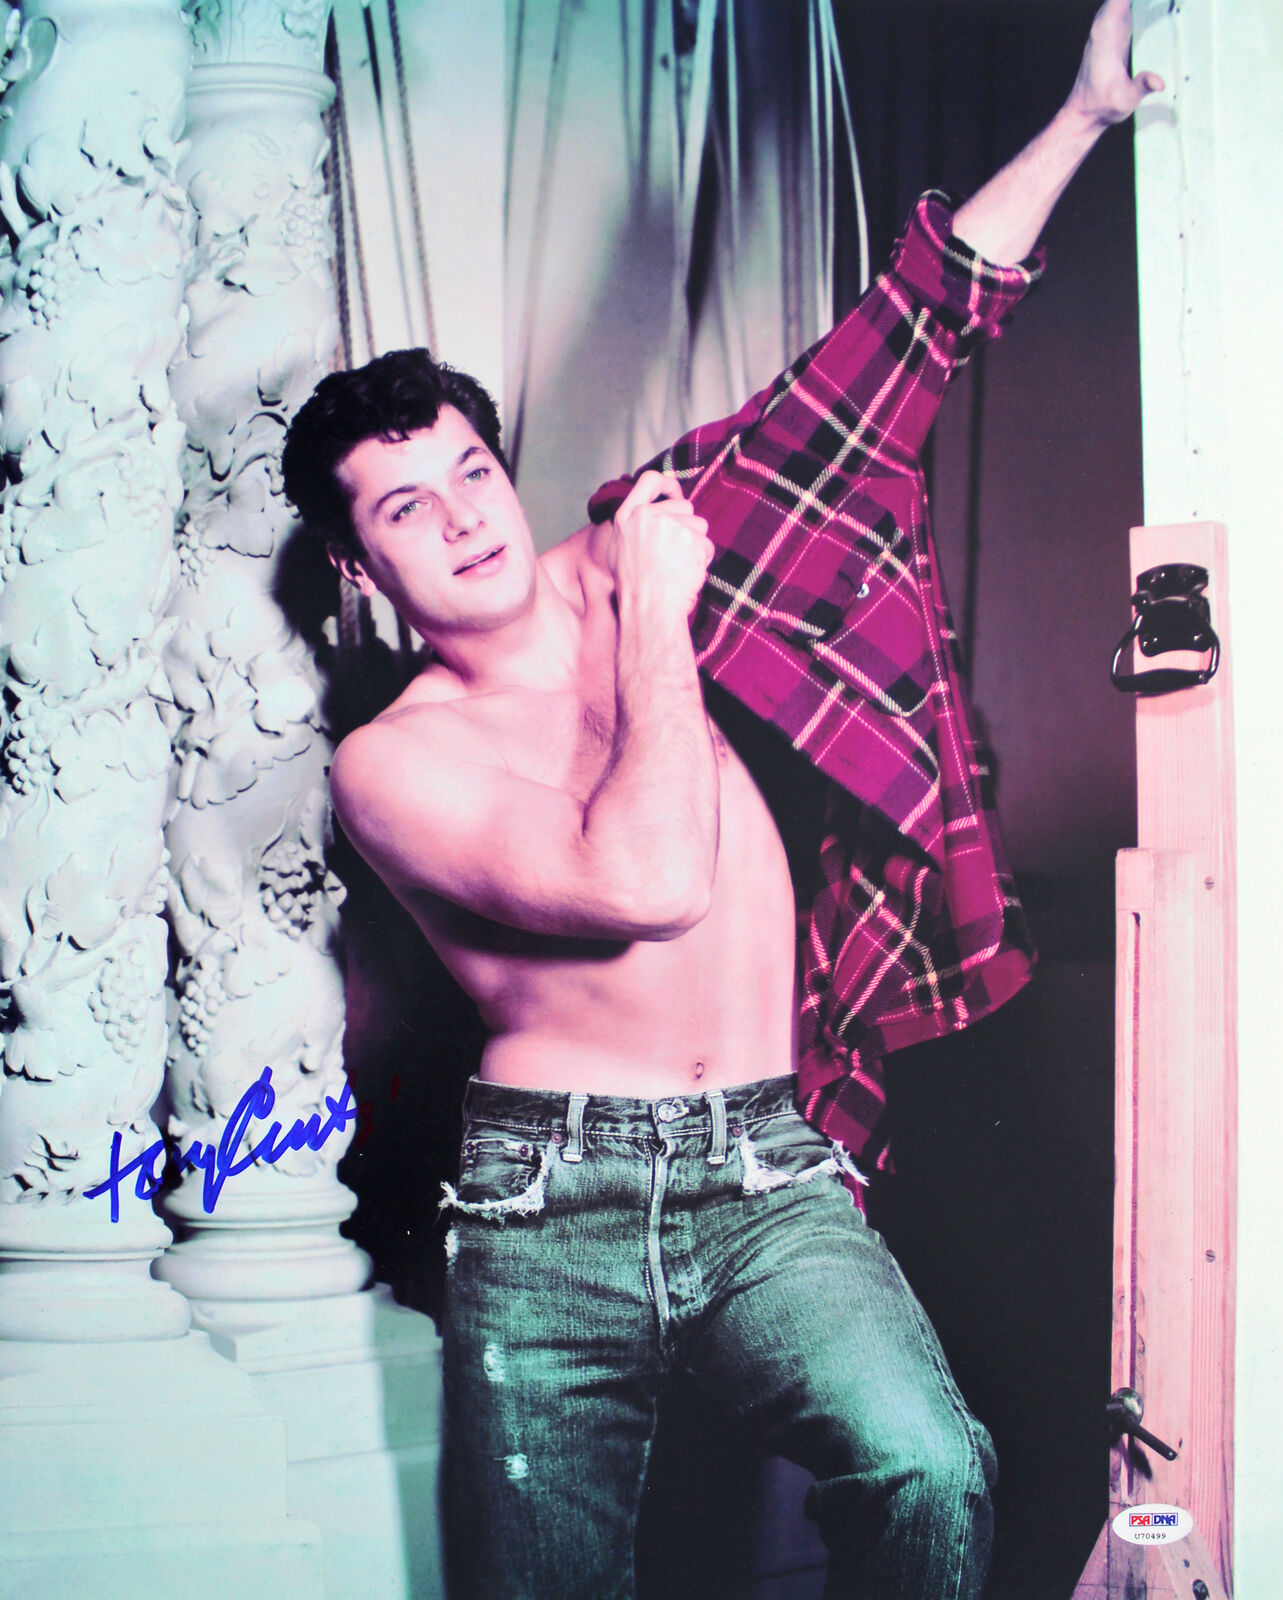 Tony Curtis Authentic Signed 16x20 Photo Poster painting Autographed PSA/DNA #U70499